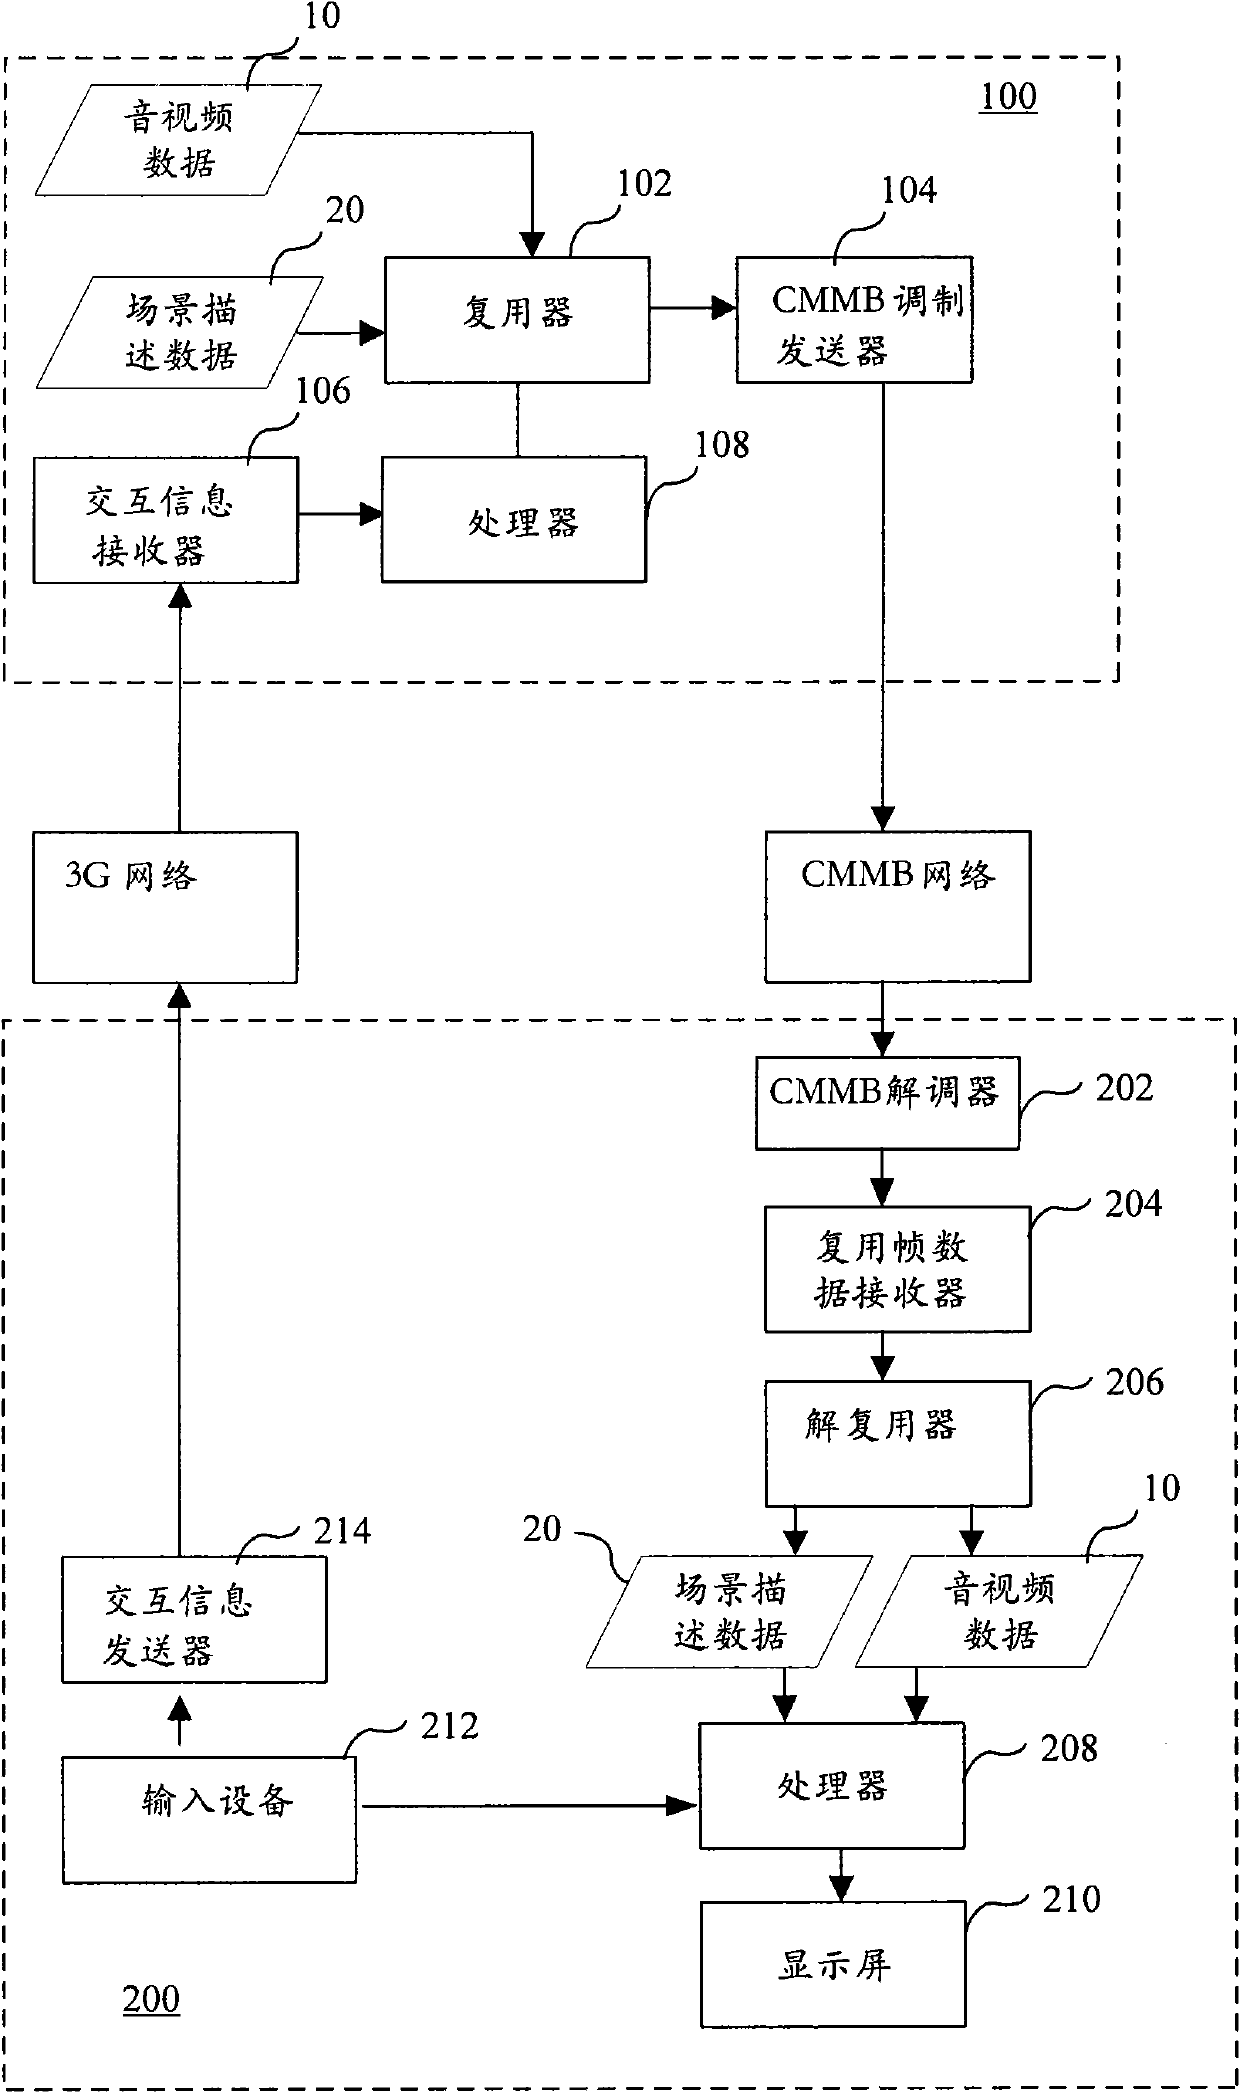 Dynamic interaction method and dynamic interaction system of CMMB (China Mobile Multimedia Broadcasting) mobile television